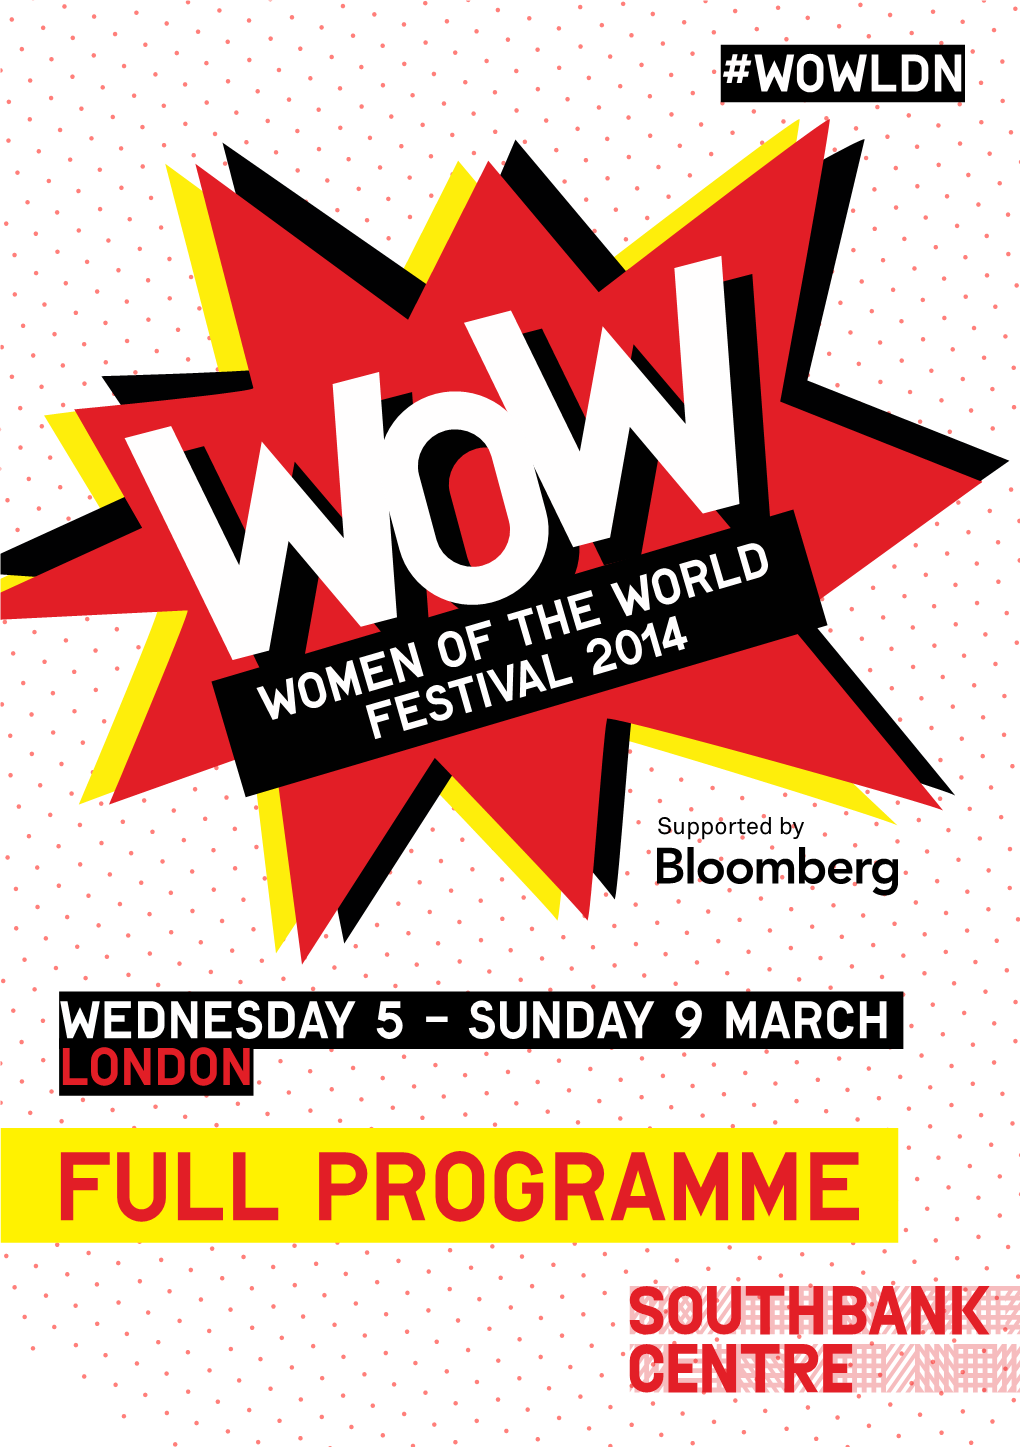 Full Programme WOW LONDON 2014 Jude Kelly WOW WEEKEND: 7, 8, 9 MARCH the WOW Weekend Is for Everybody